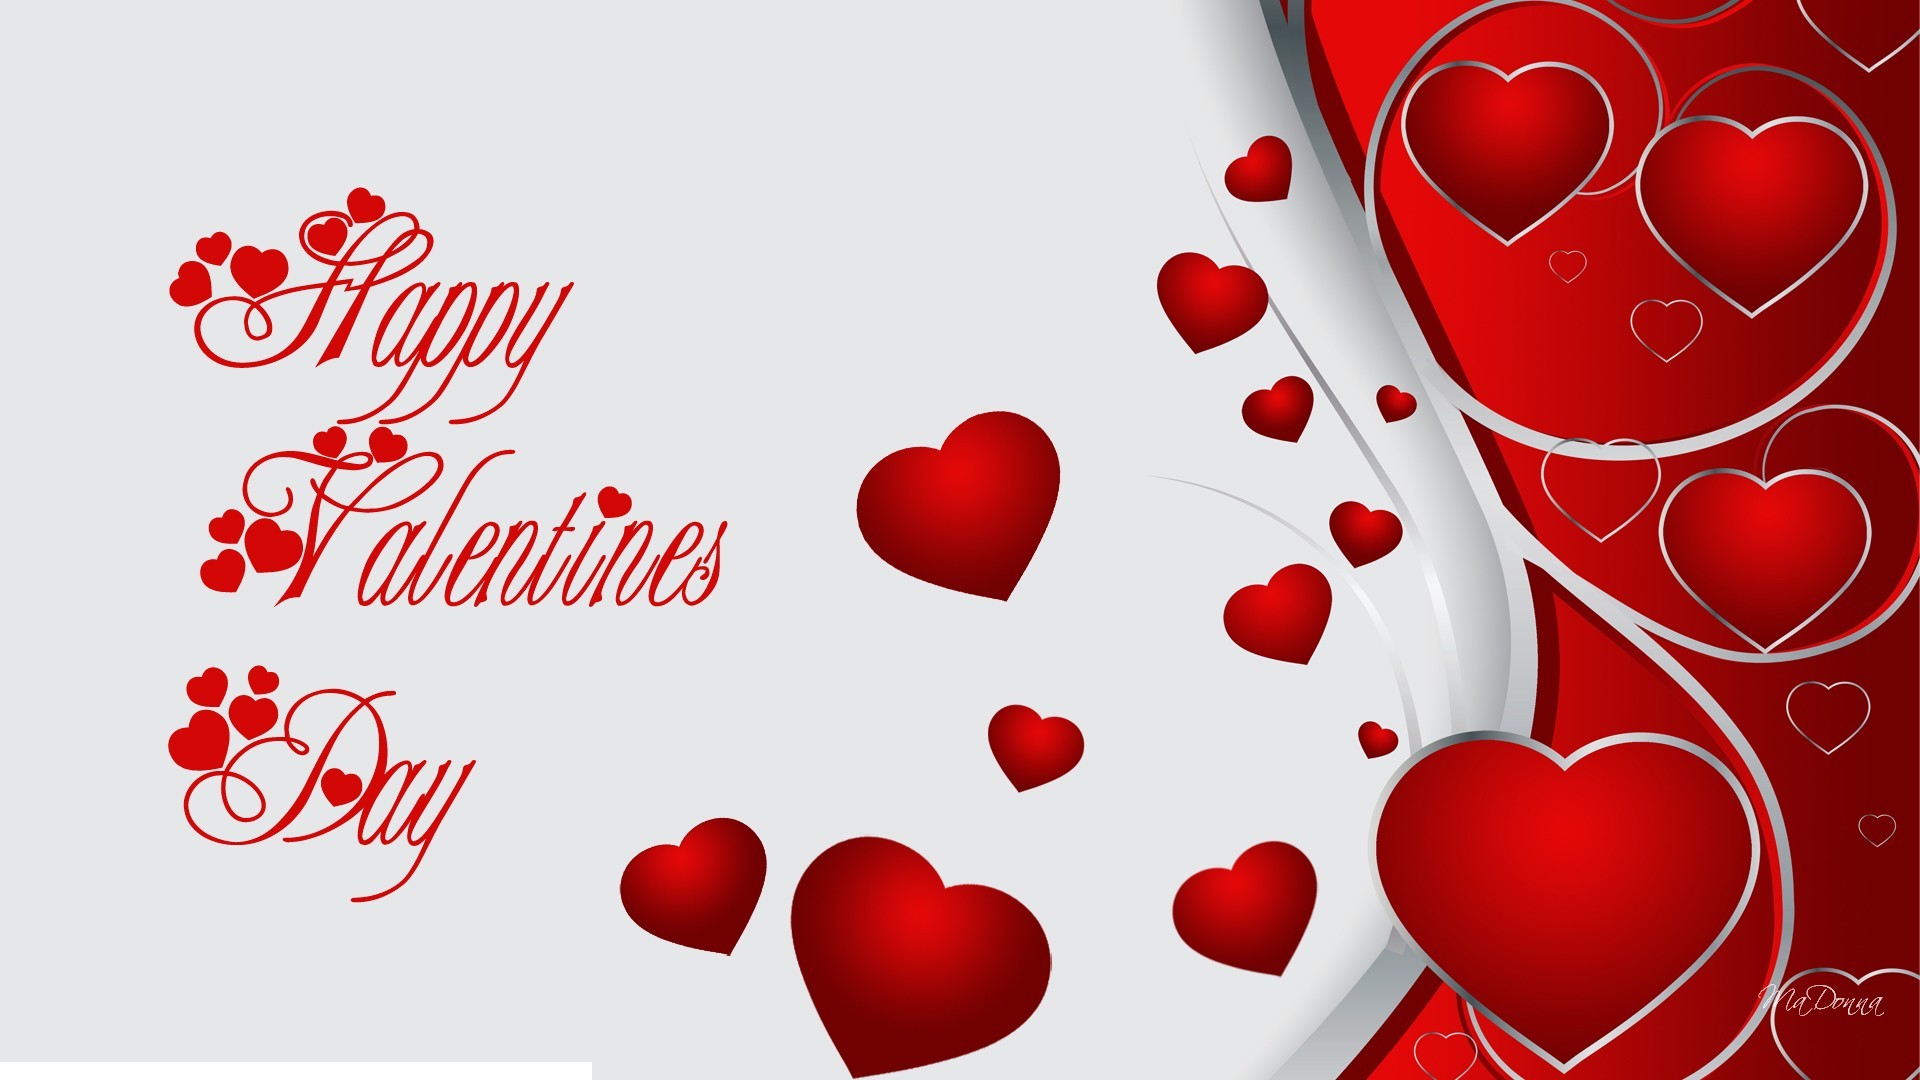 Happy Valentines Day HD Wallpaper Cool Image